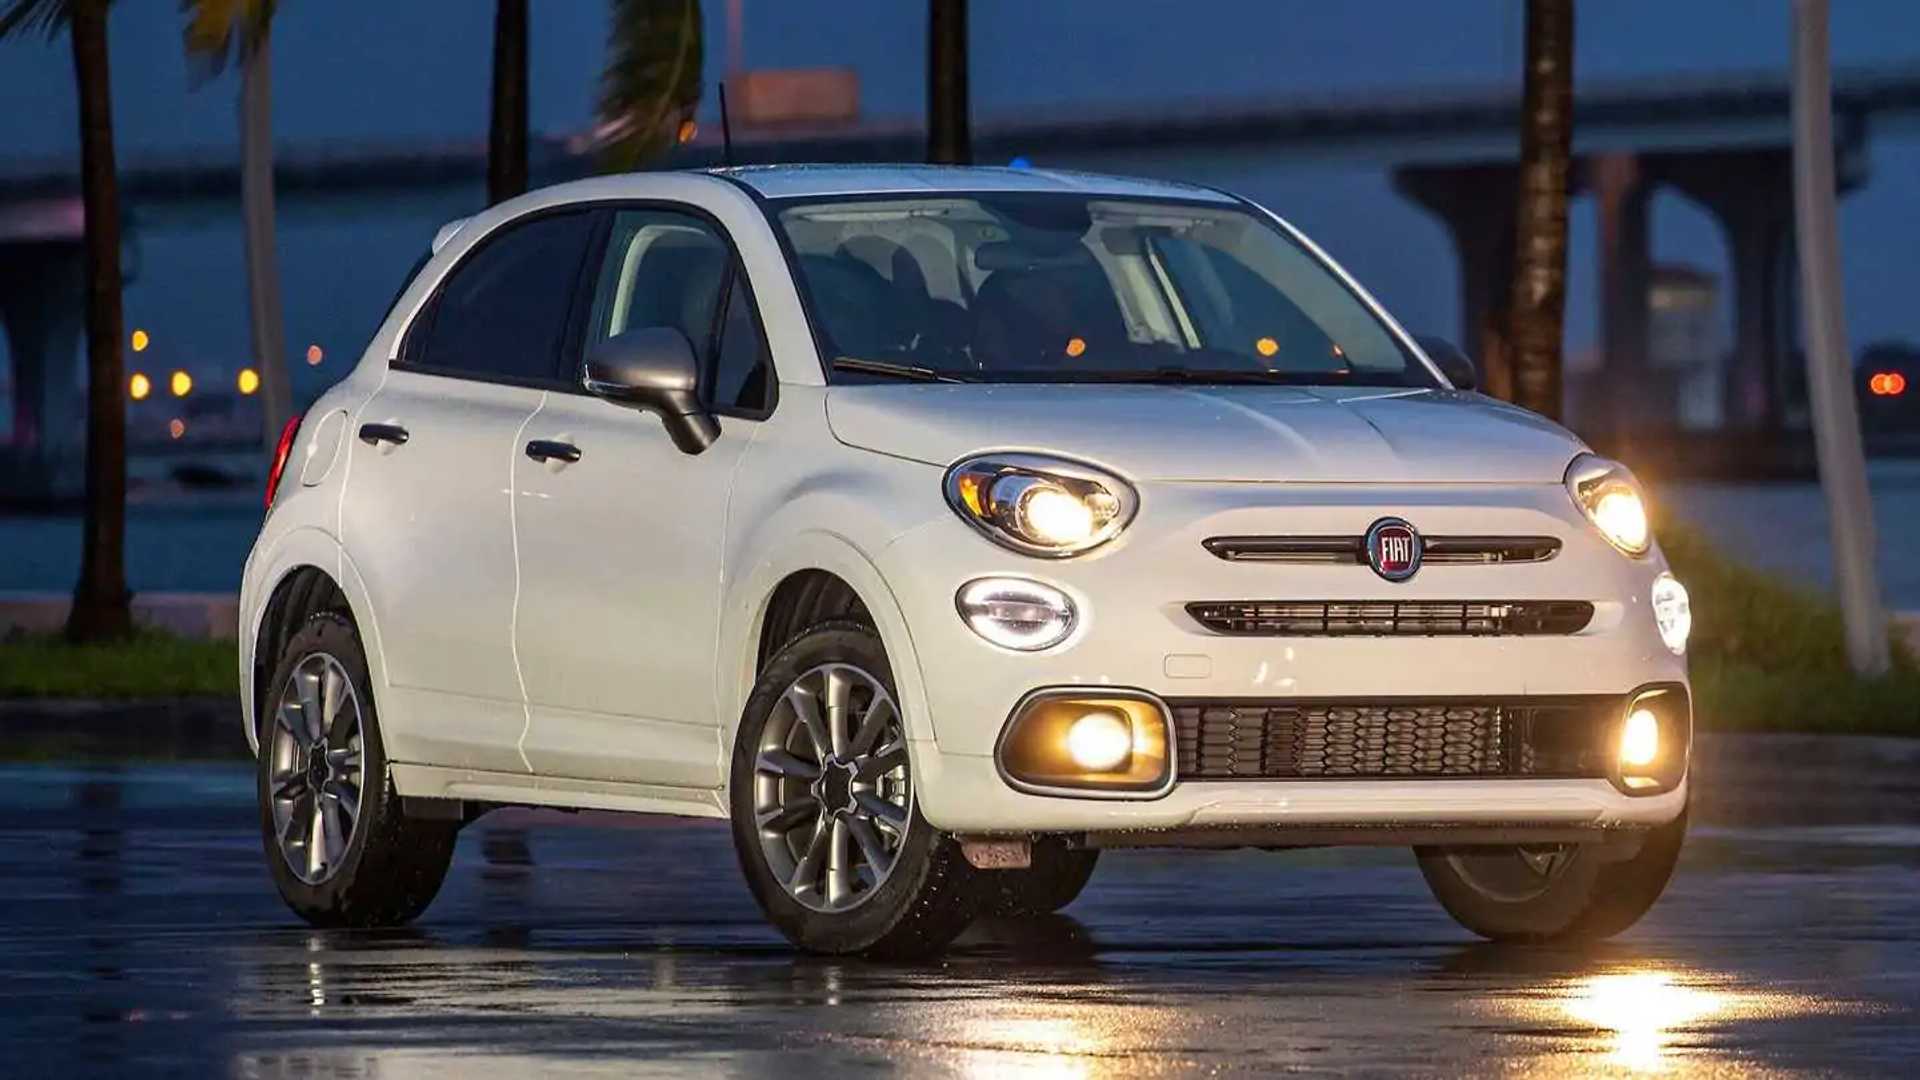 Fiat 500X To Be Discontinued In The US After Current Generation